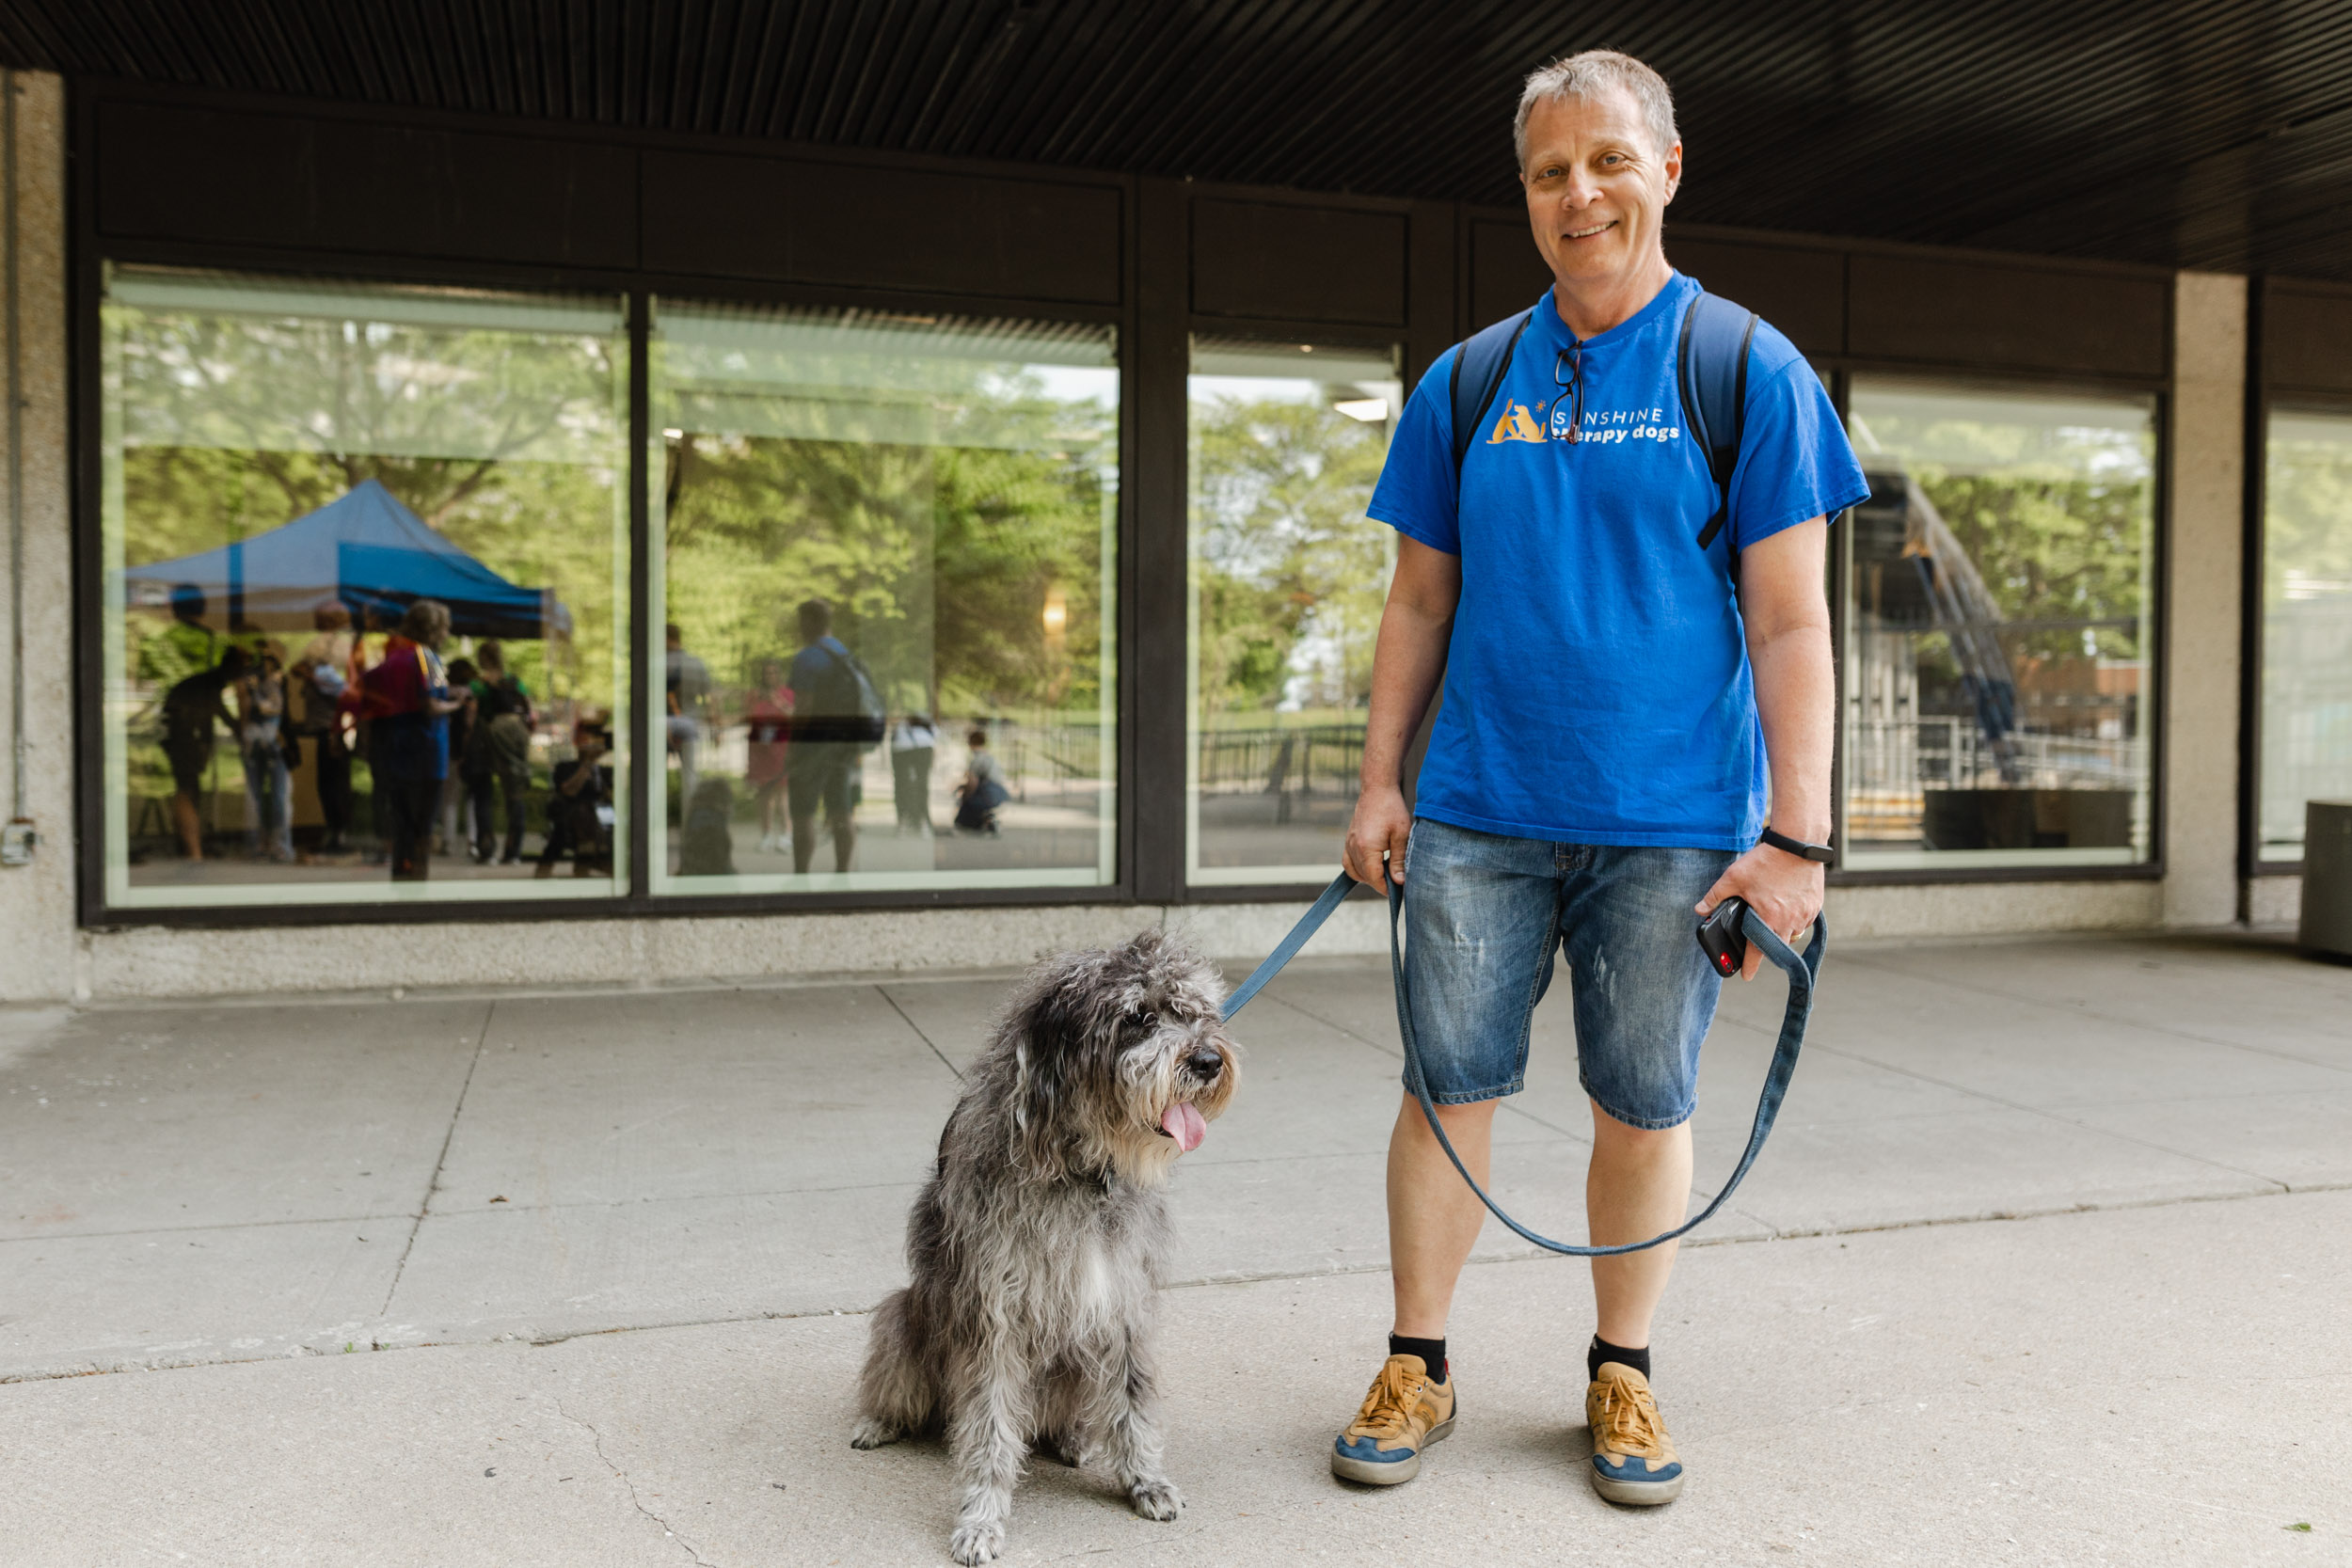 A man at a conference with a dog on a leash.